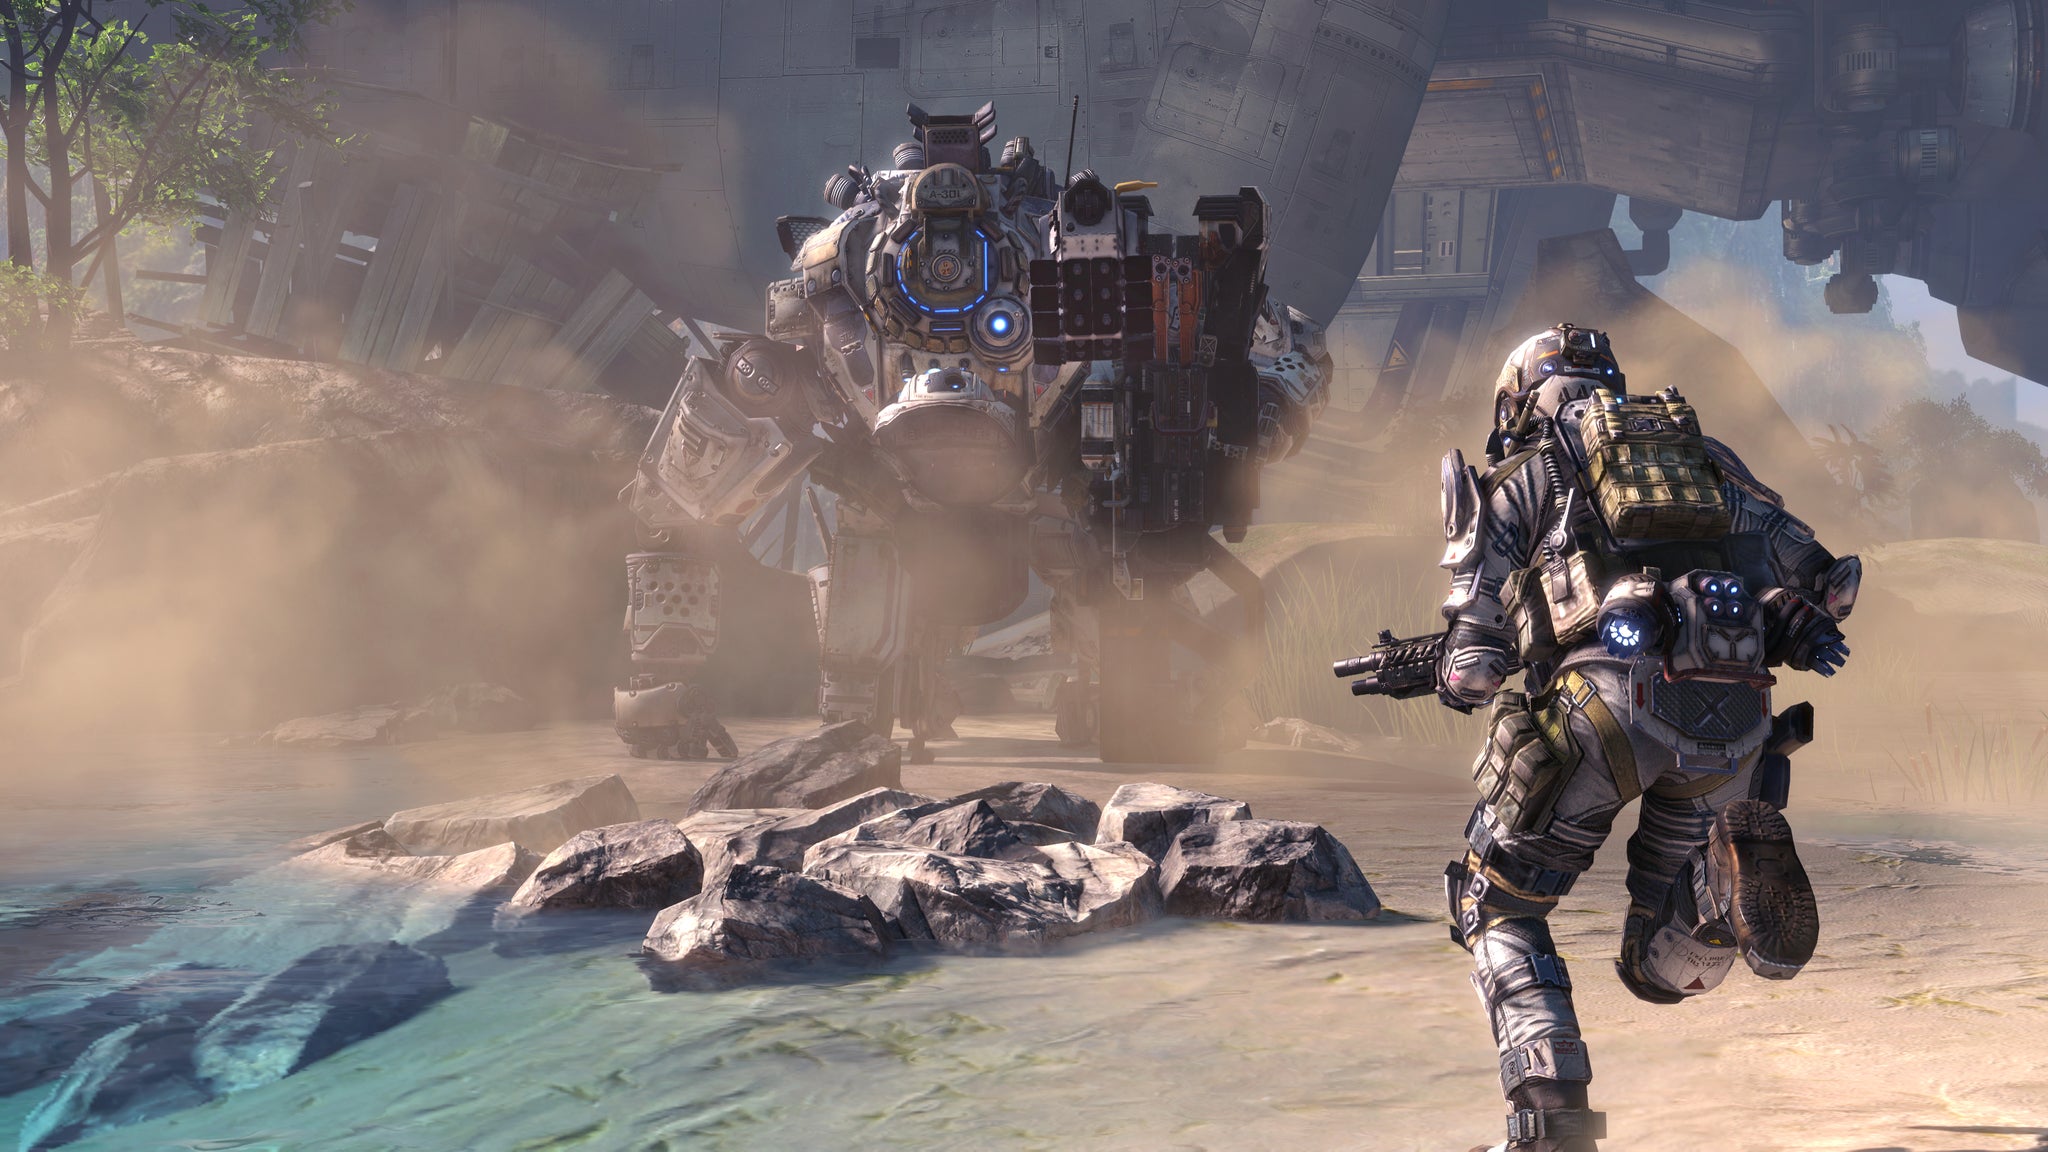 Titanfall has been attracting GTA levels of hype